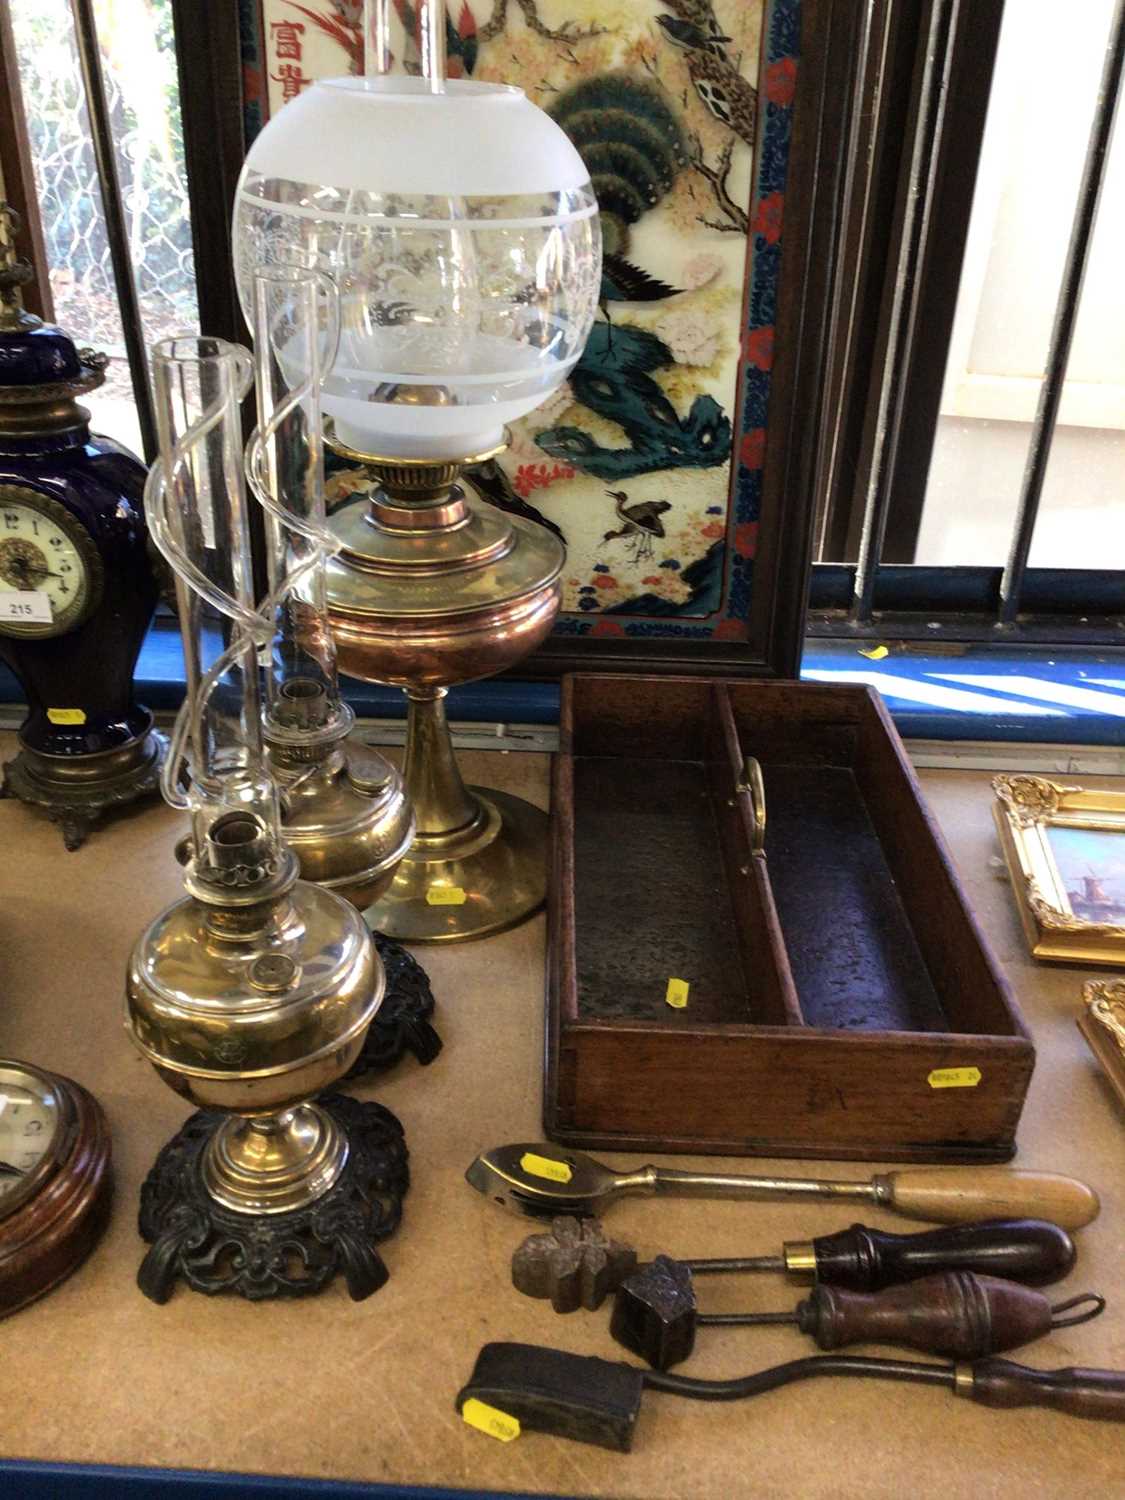 Lot 216 - George III mahogany cutlery tray, pair of Russian brass oil lamps, the chimneys with twist pattern on the outside, together with a larger copper and brass oil lamp